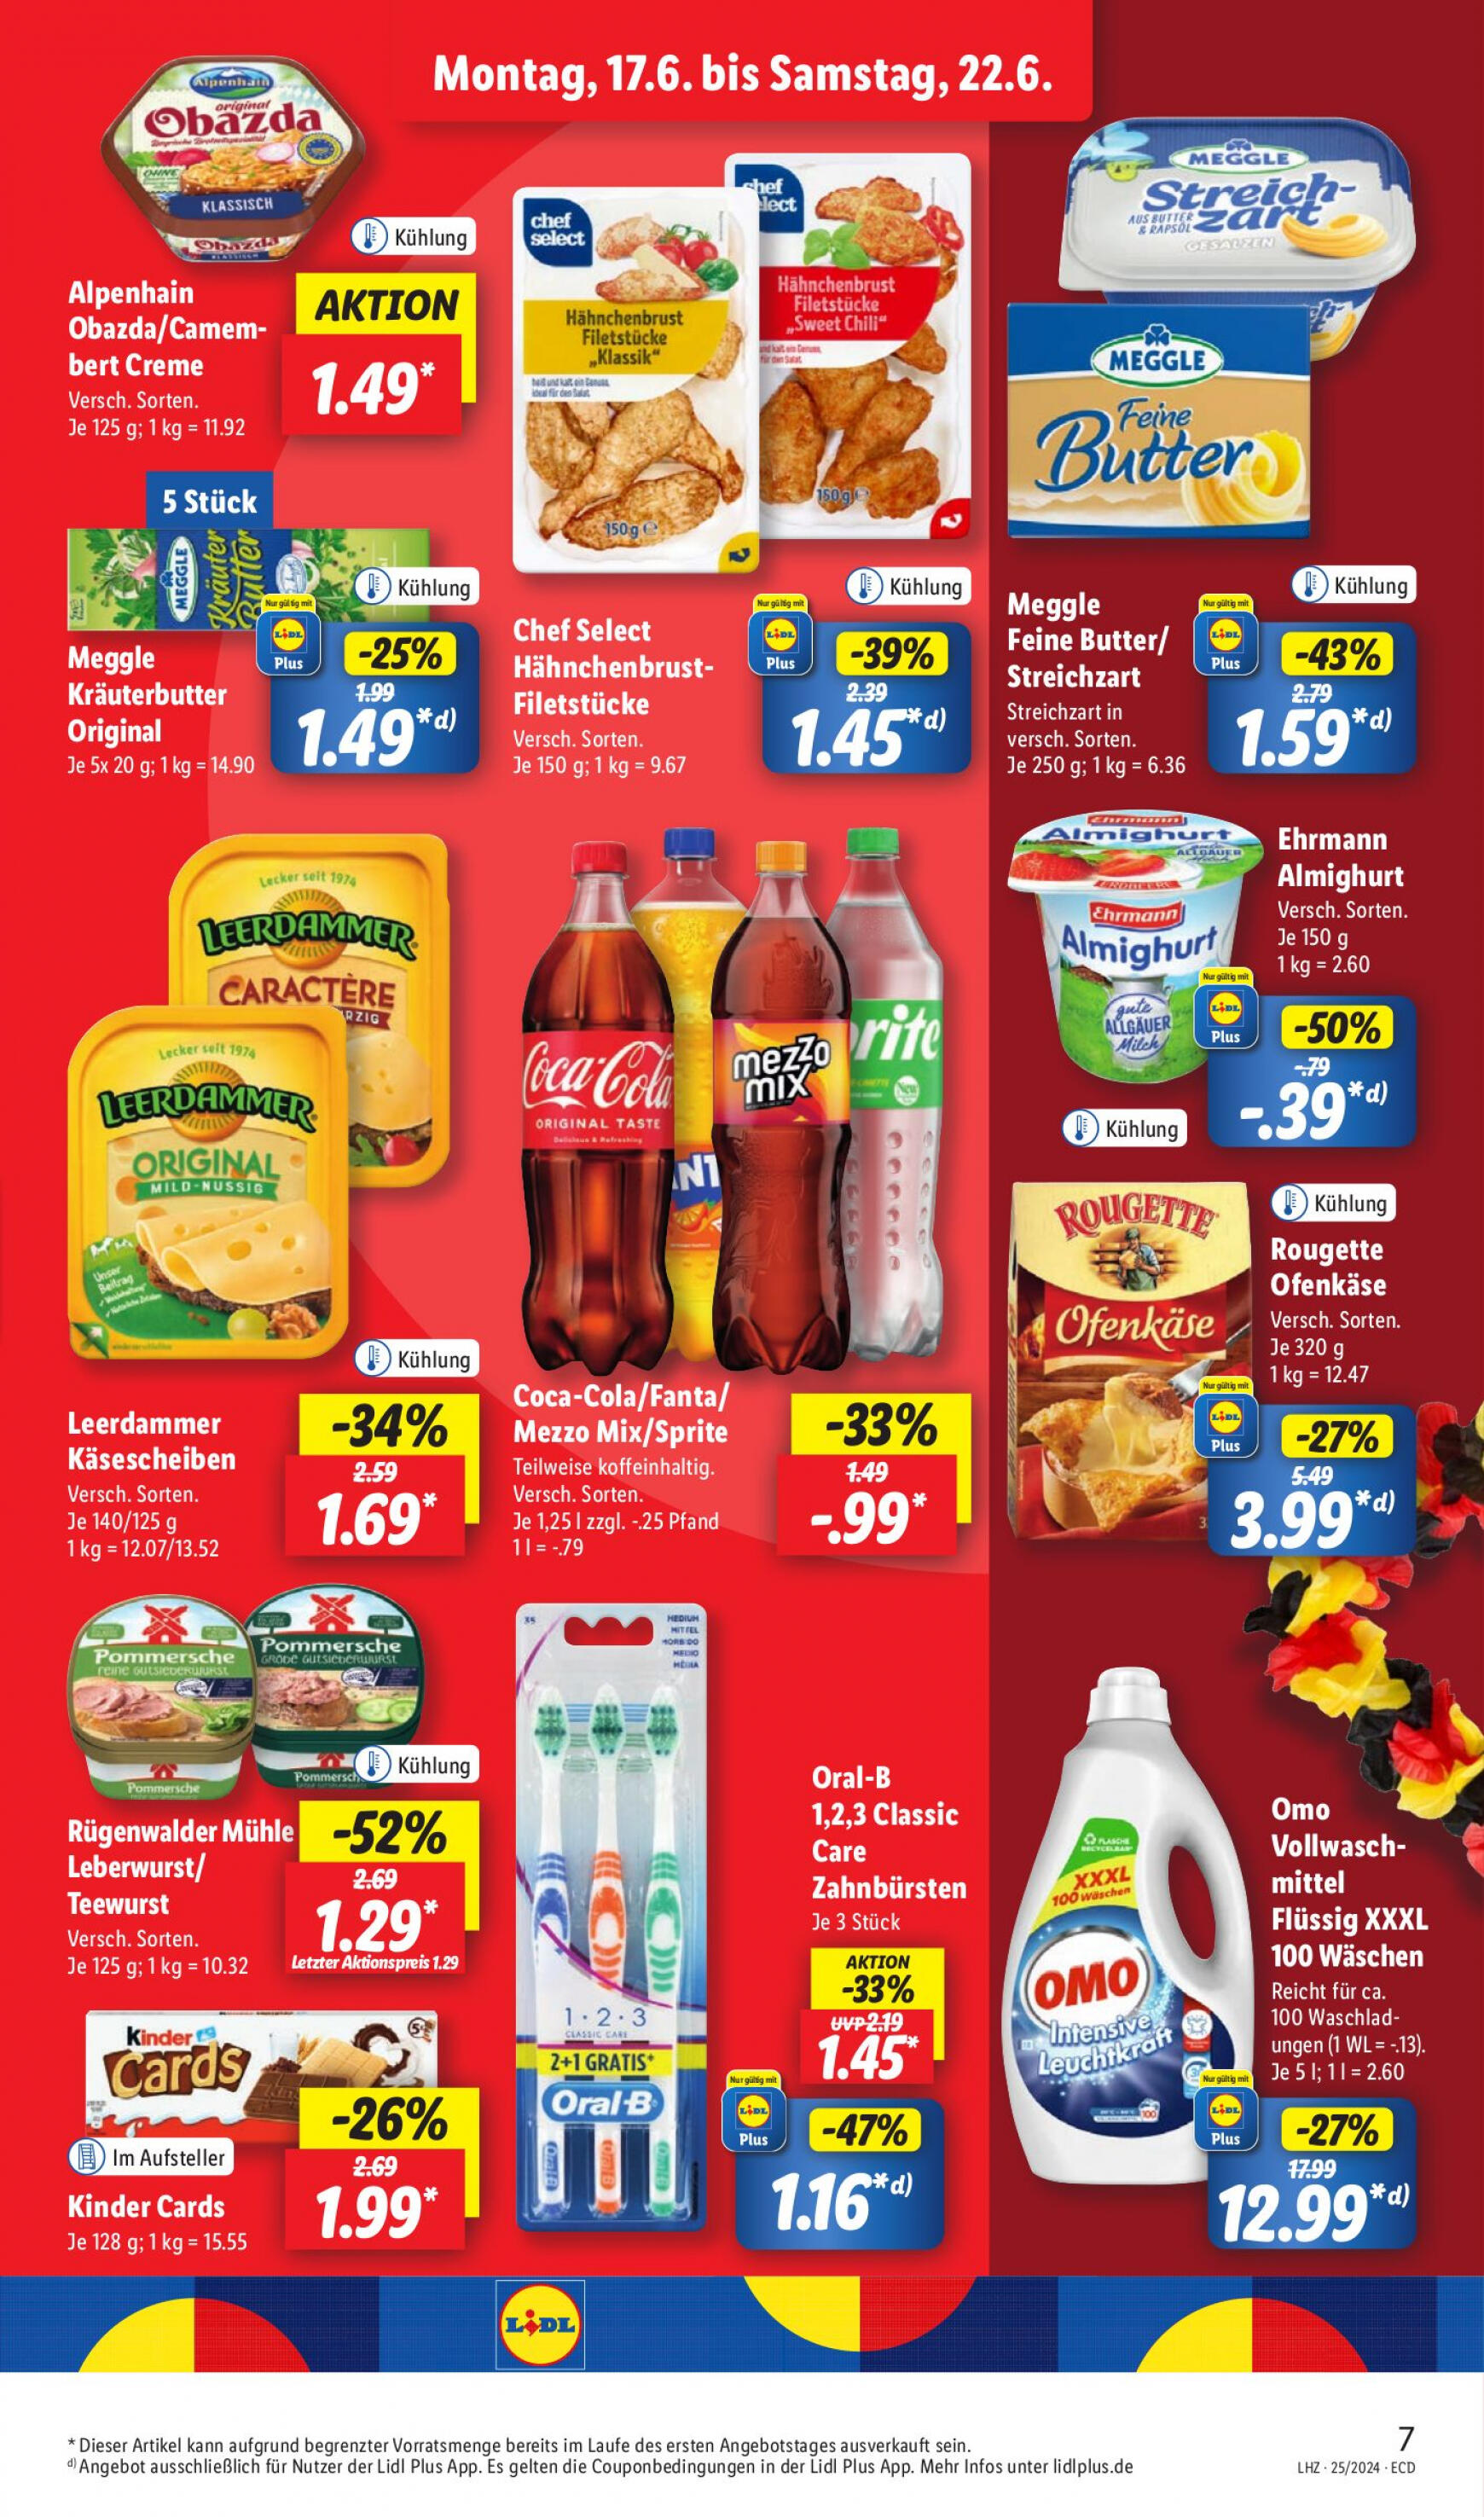 lidl - Flyer Lidl aktuell 17.06. - 22.06. - page: 11